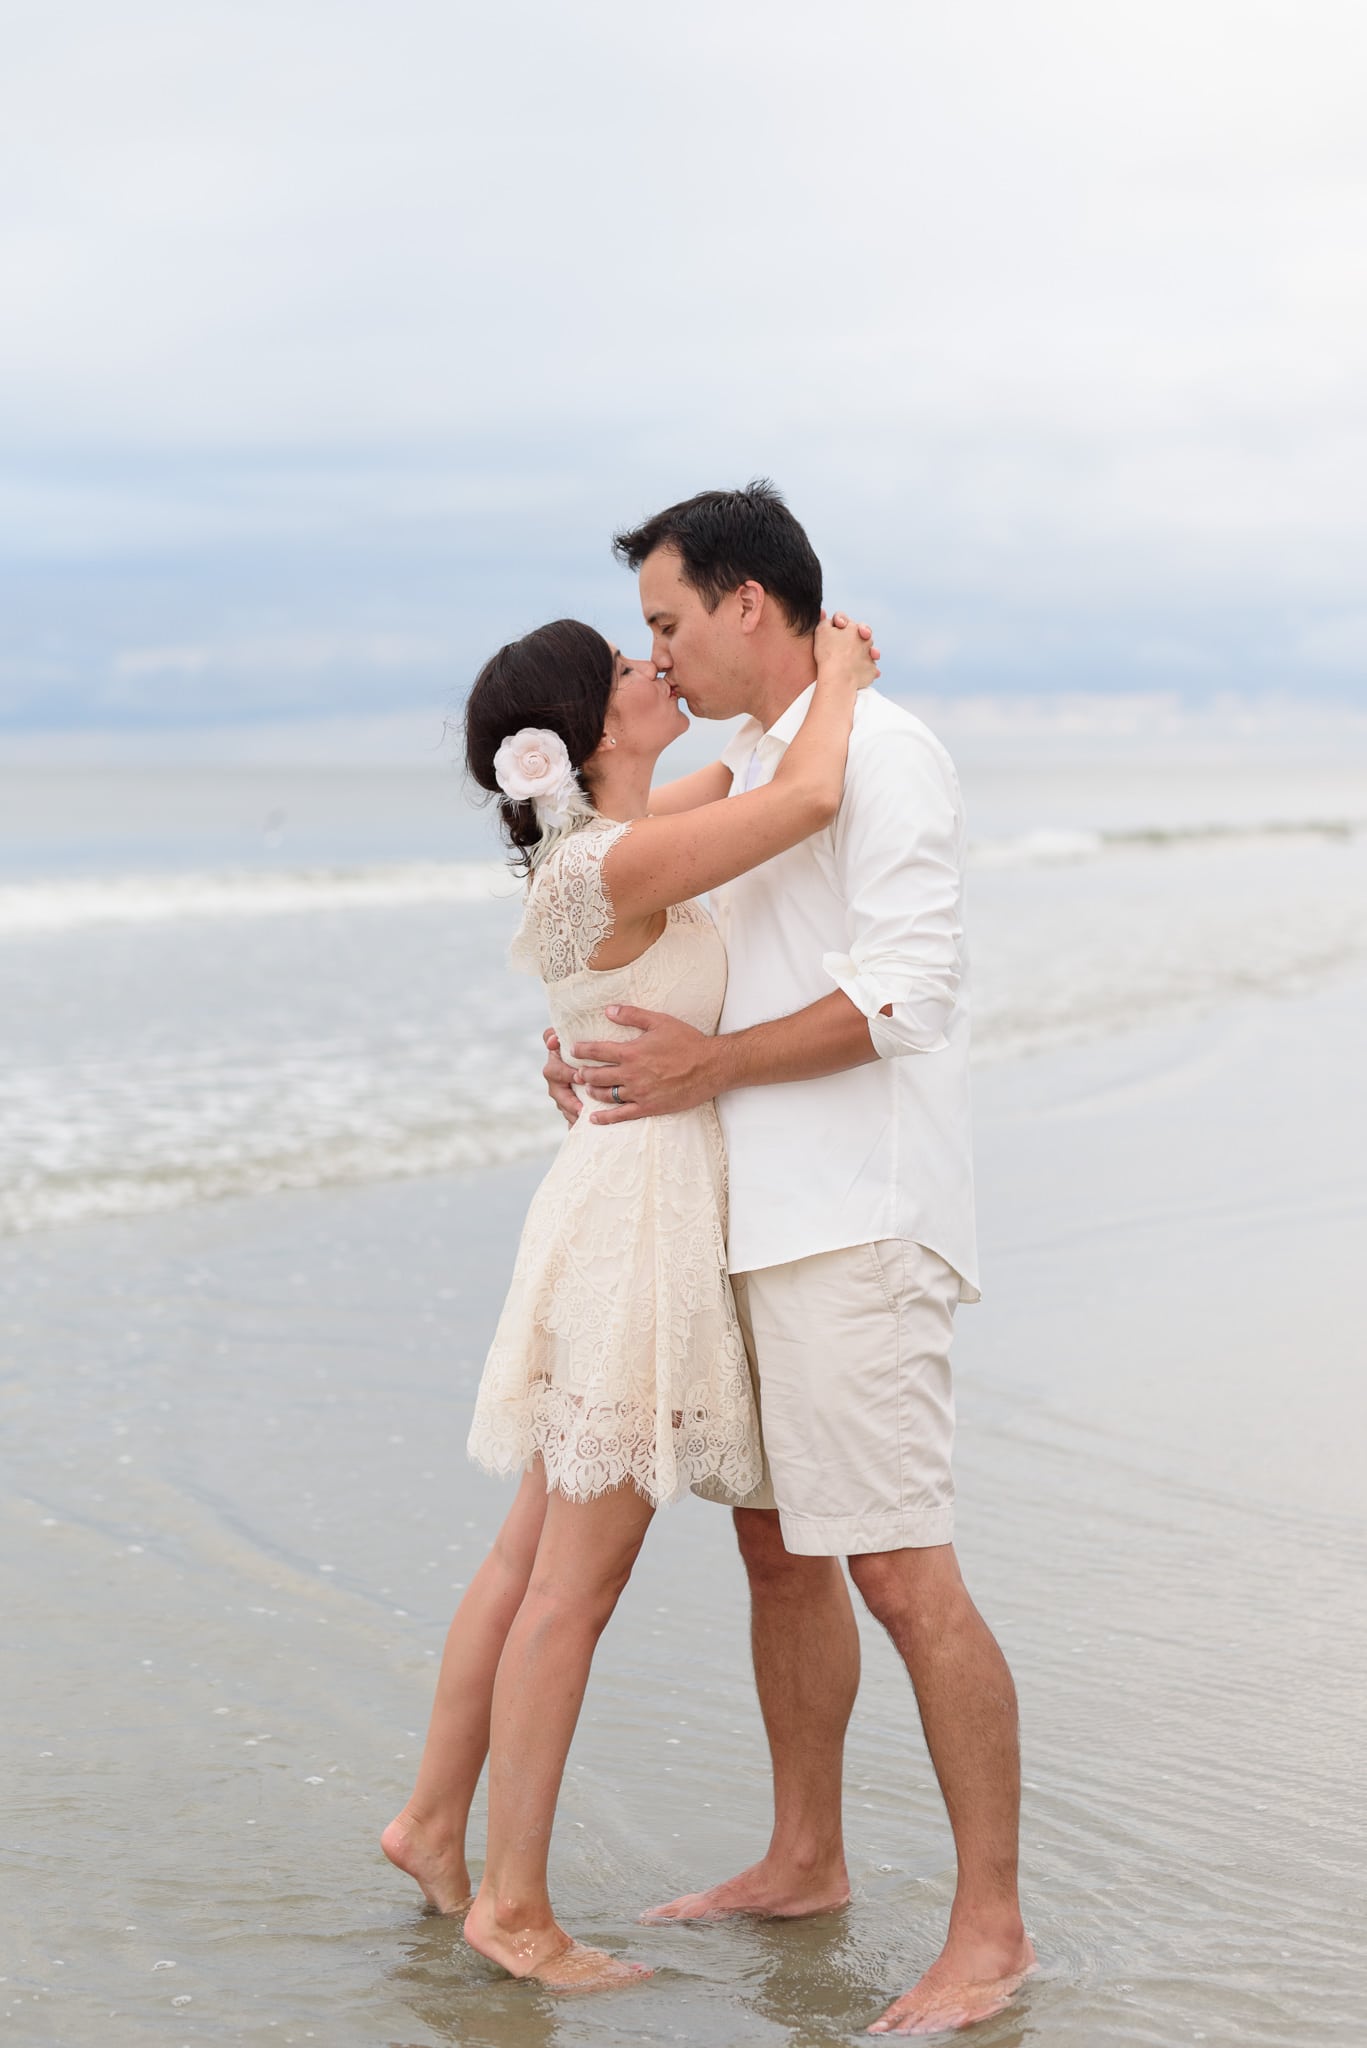 Kiss in front of the ocean - North Beach Plantation